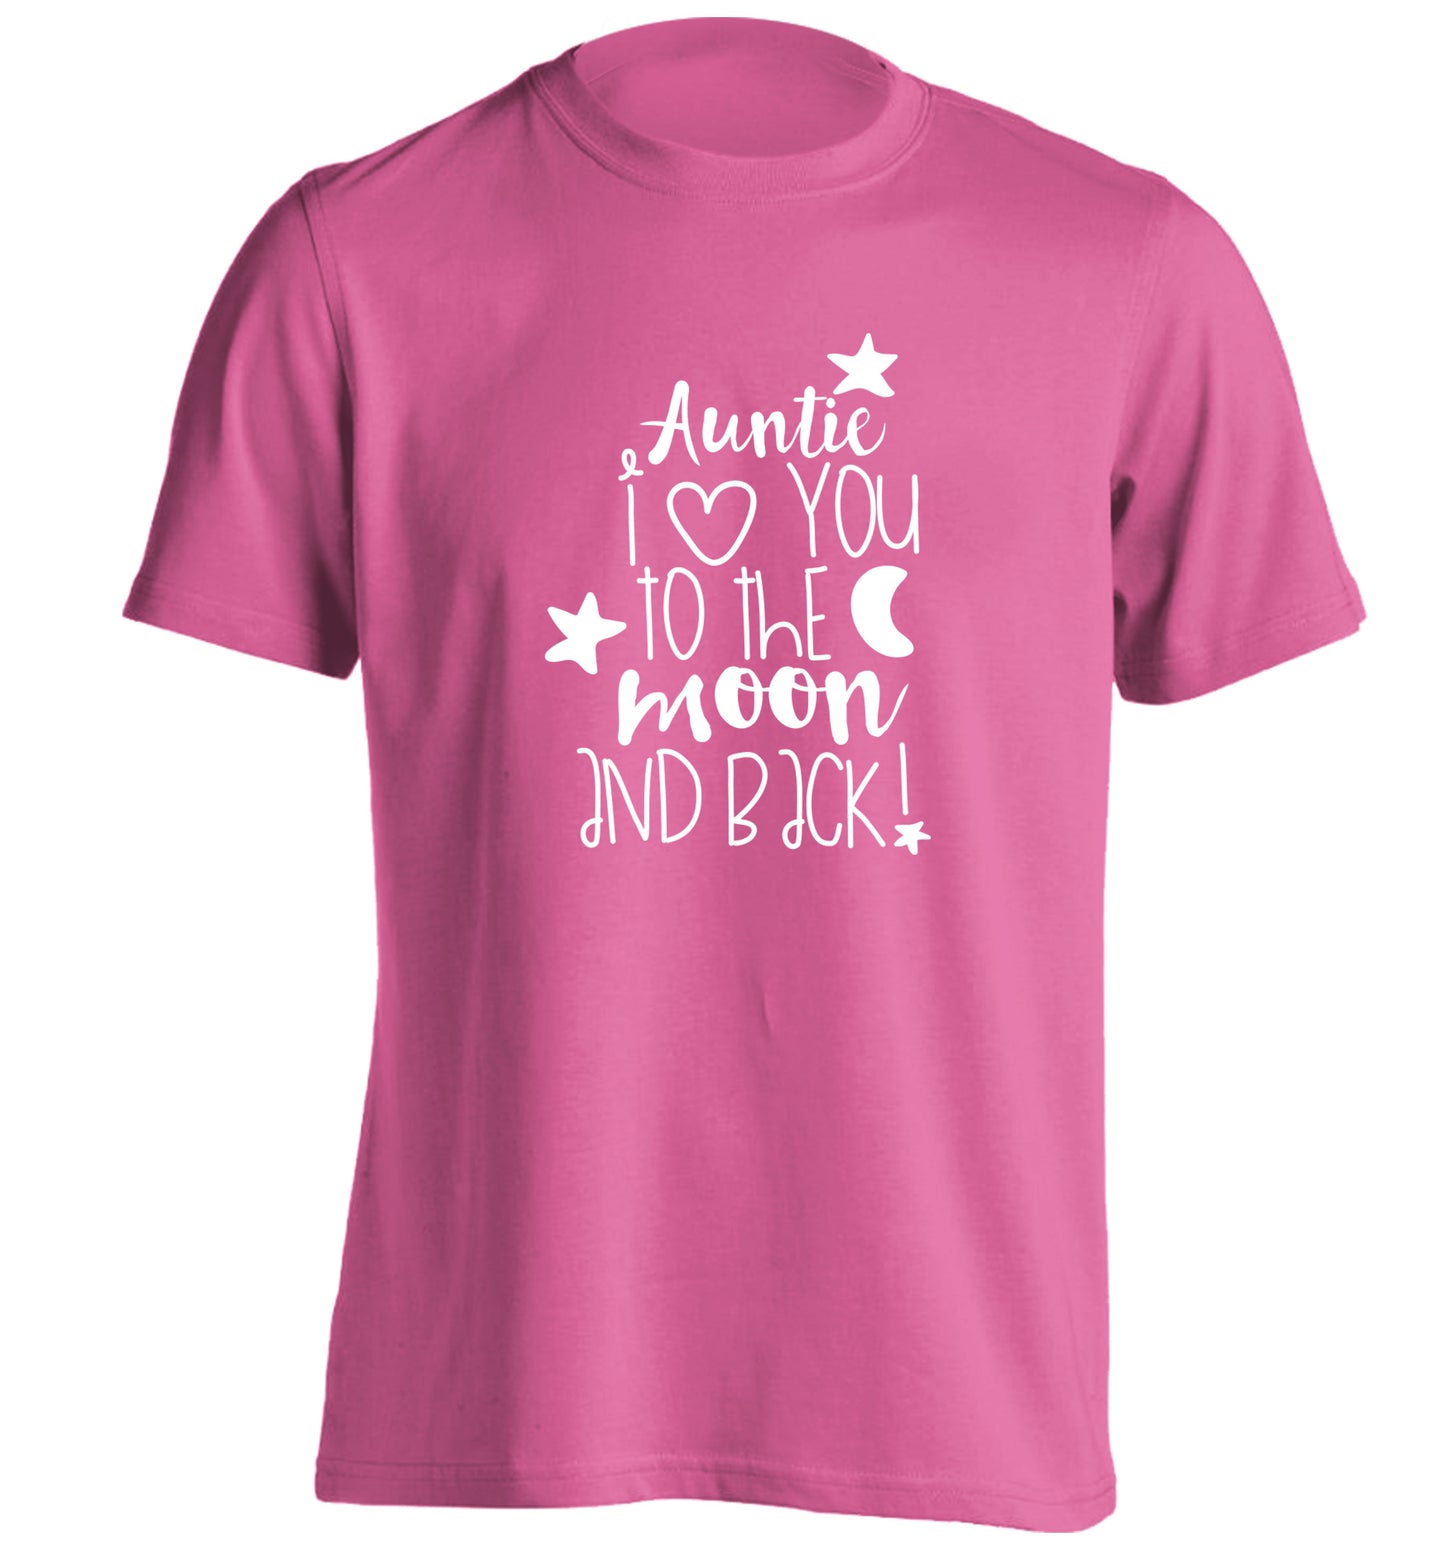 Auntie I love you to the moon and back adults unisex pink Tshirt 2XL